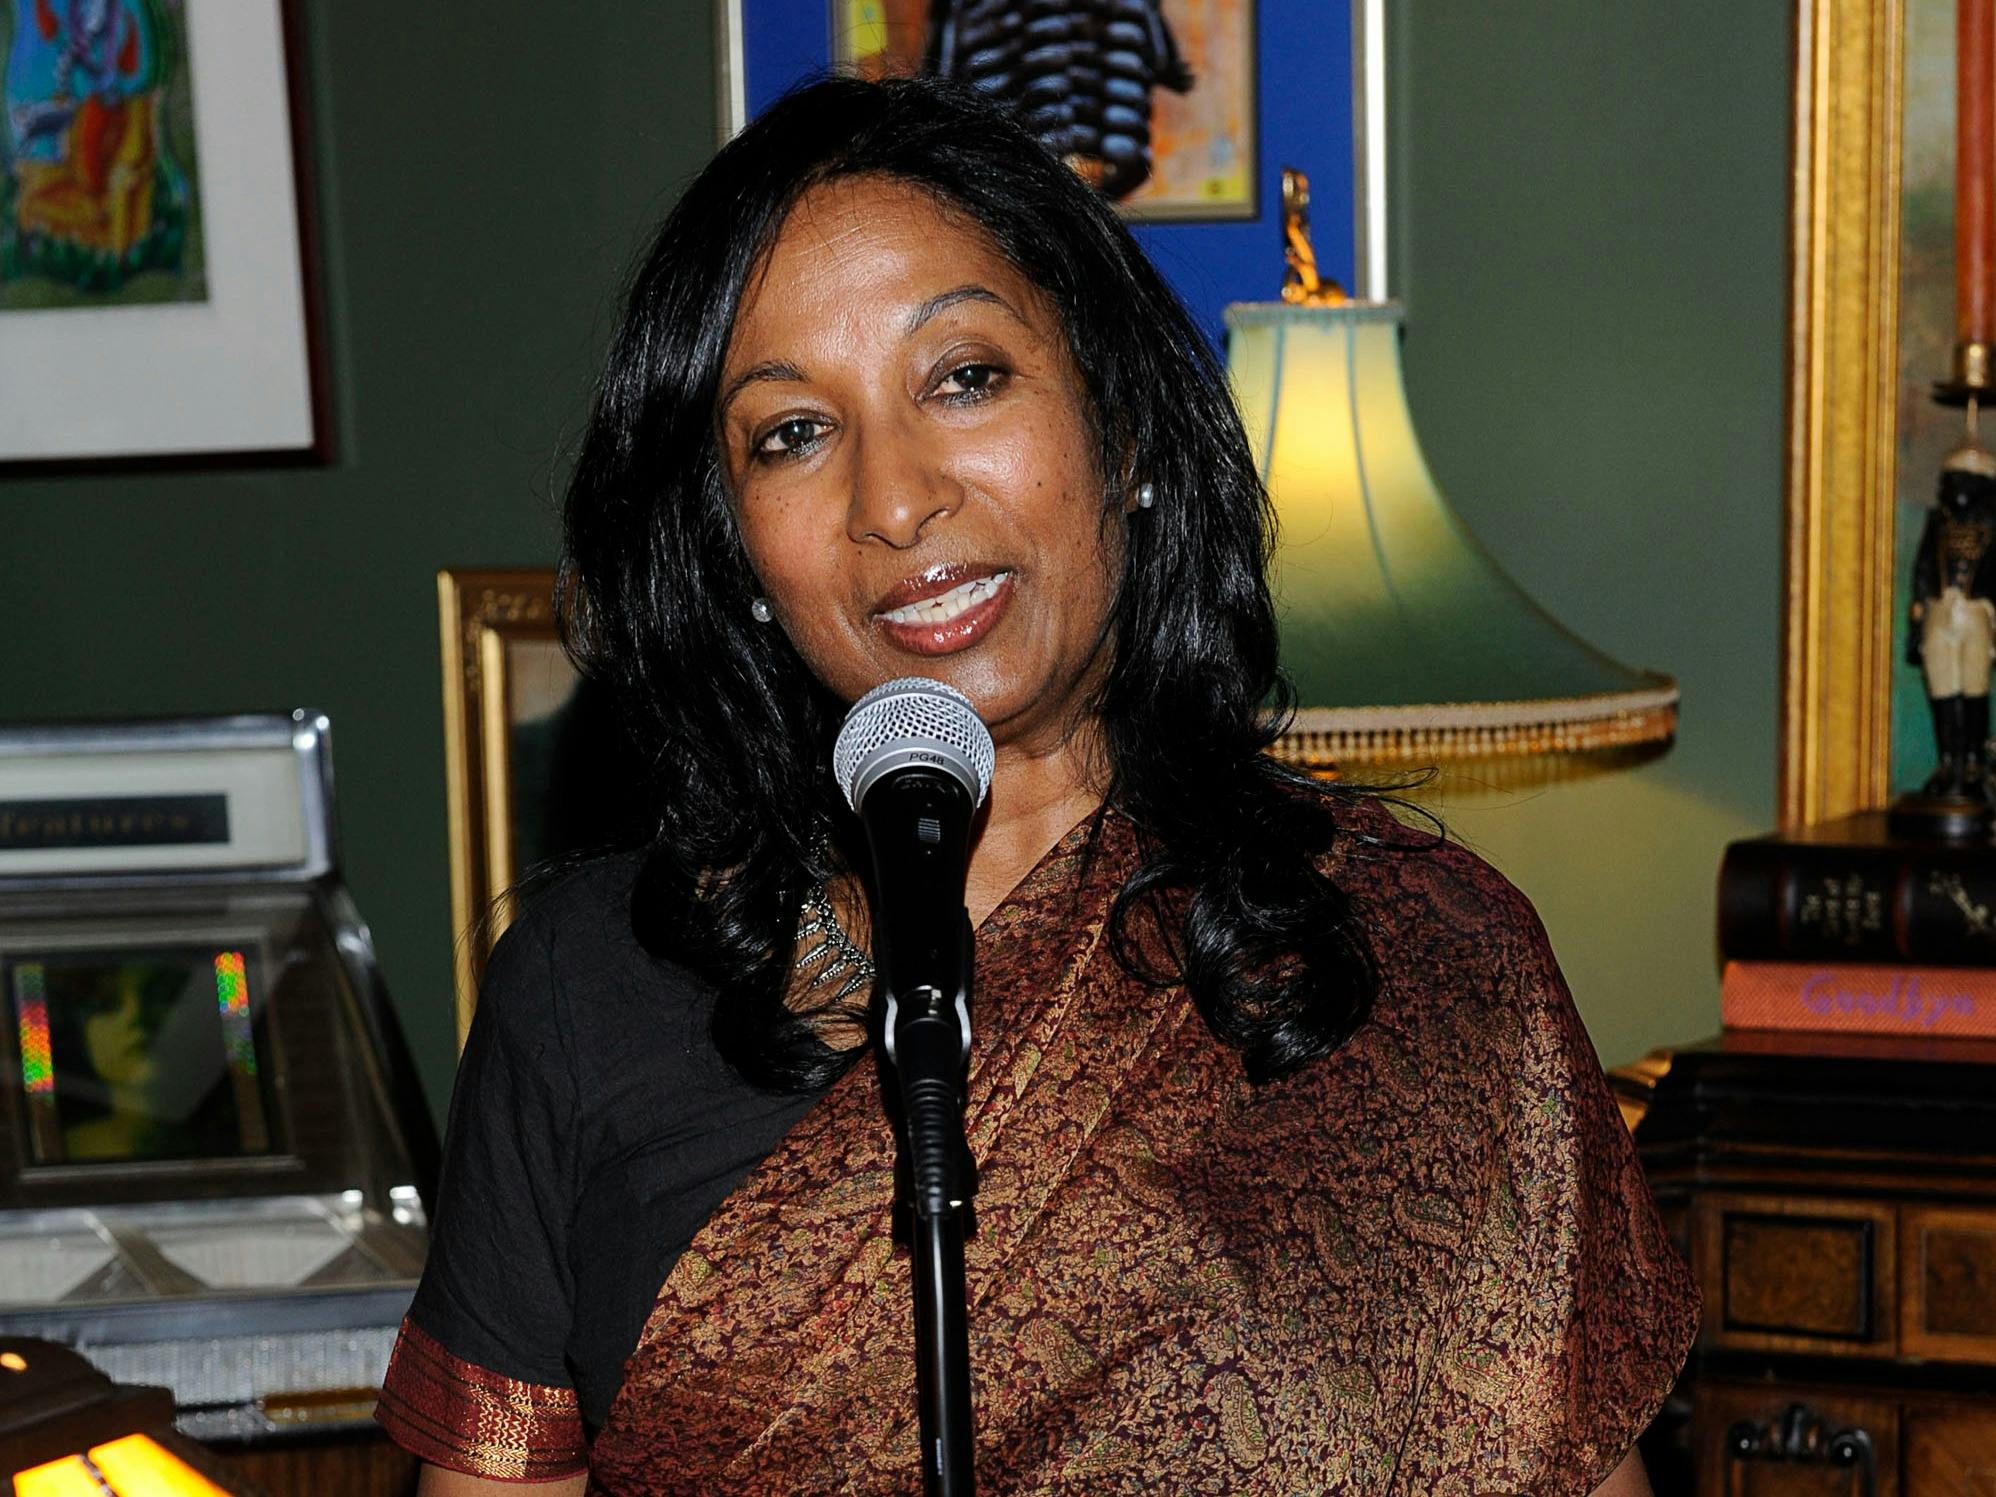 Meena Alexander attends a dinner at The Norman Mailer House on June 2, 2011 in New York City (Eugene Gologursky/Getty Images for The Norman Mailer Center)
